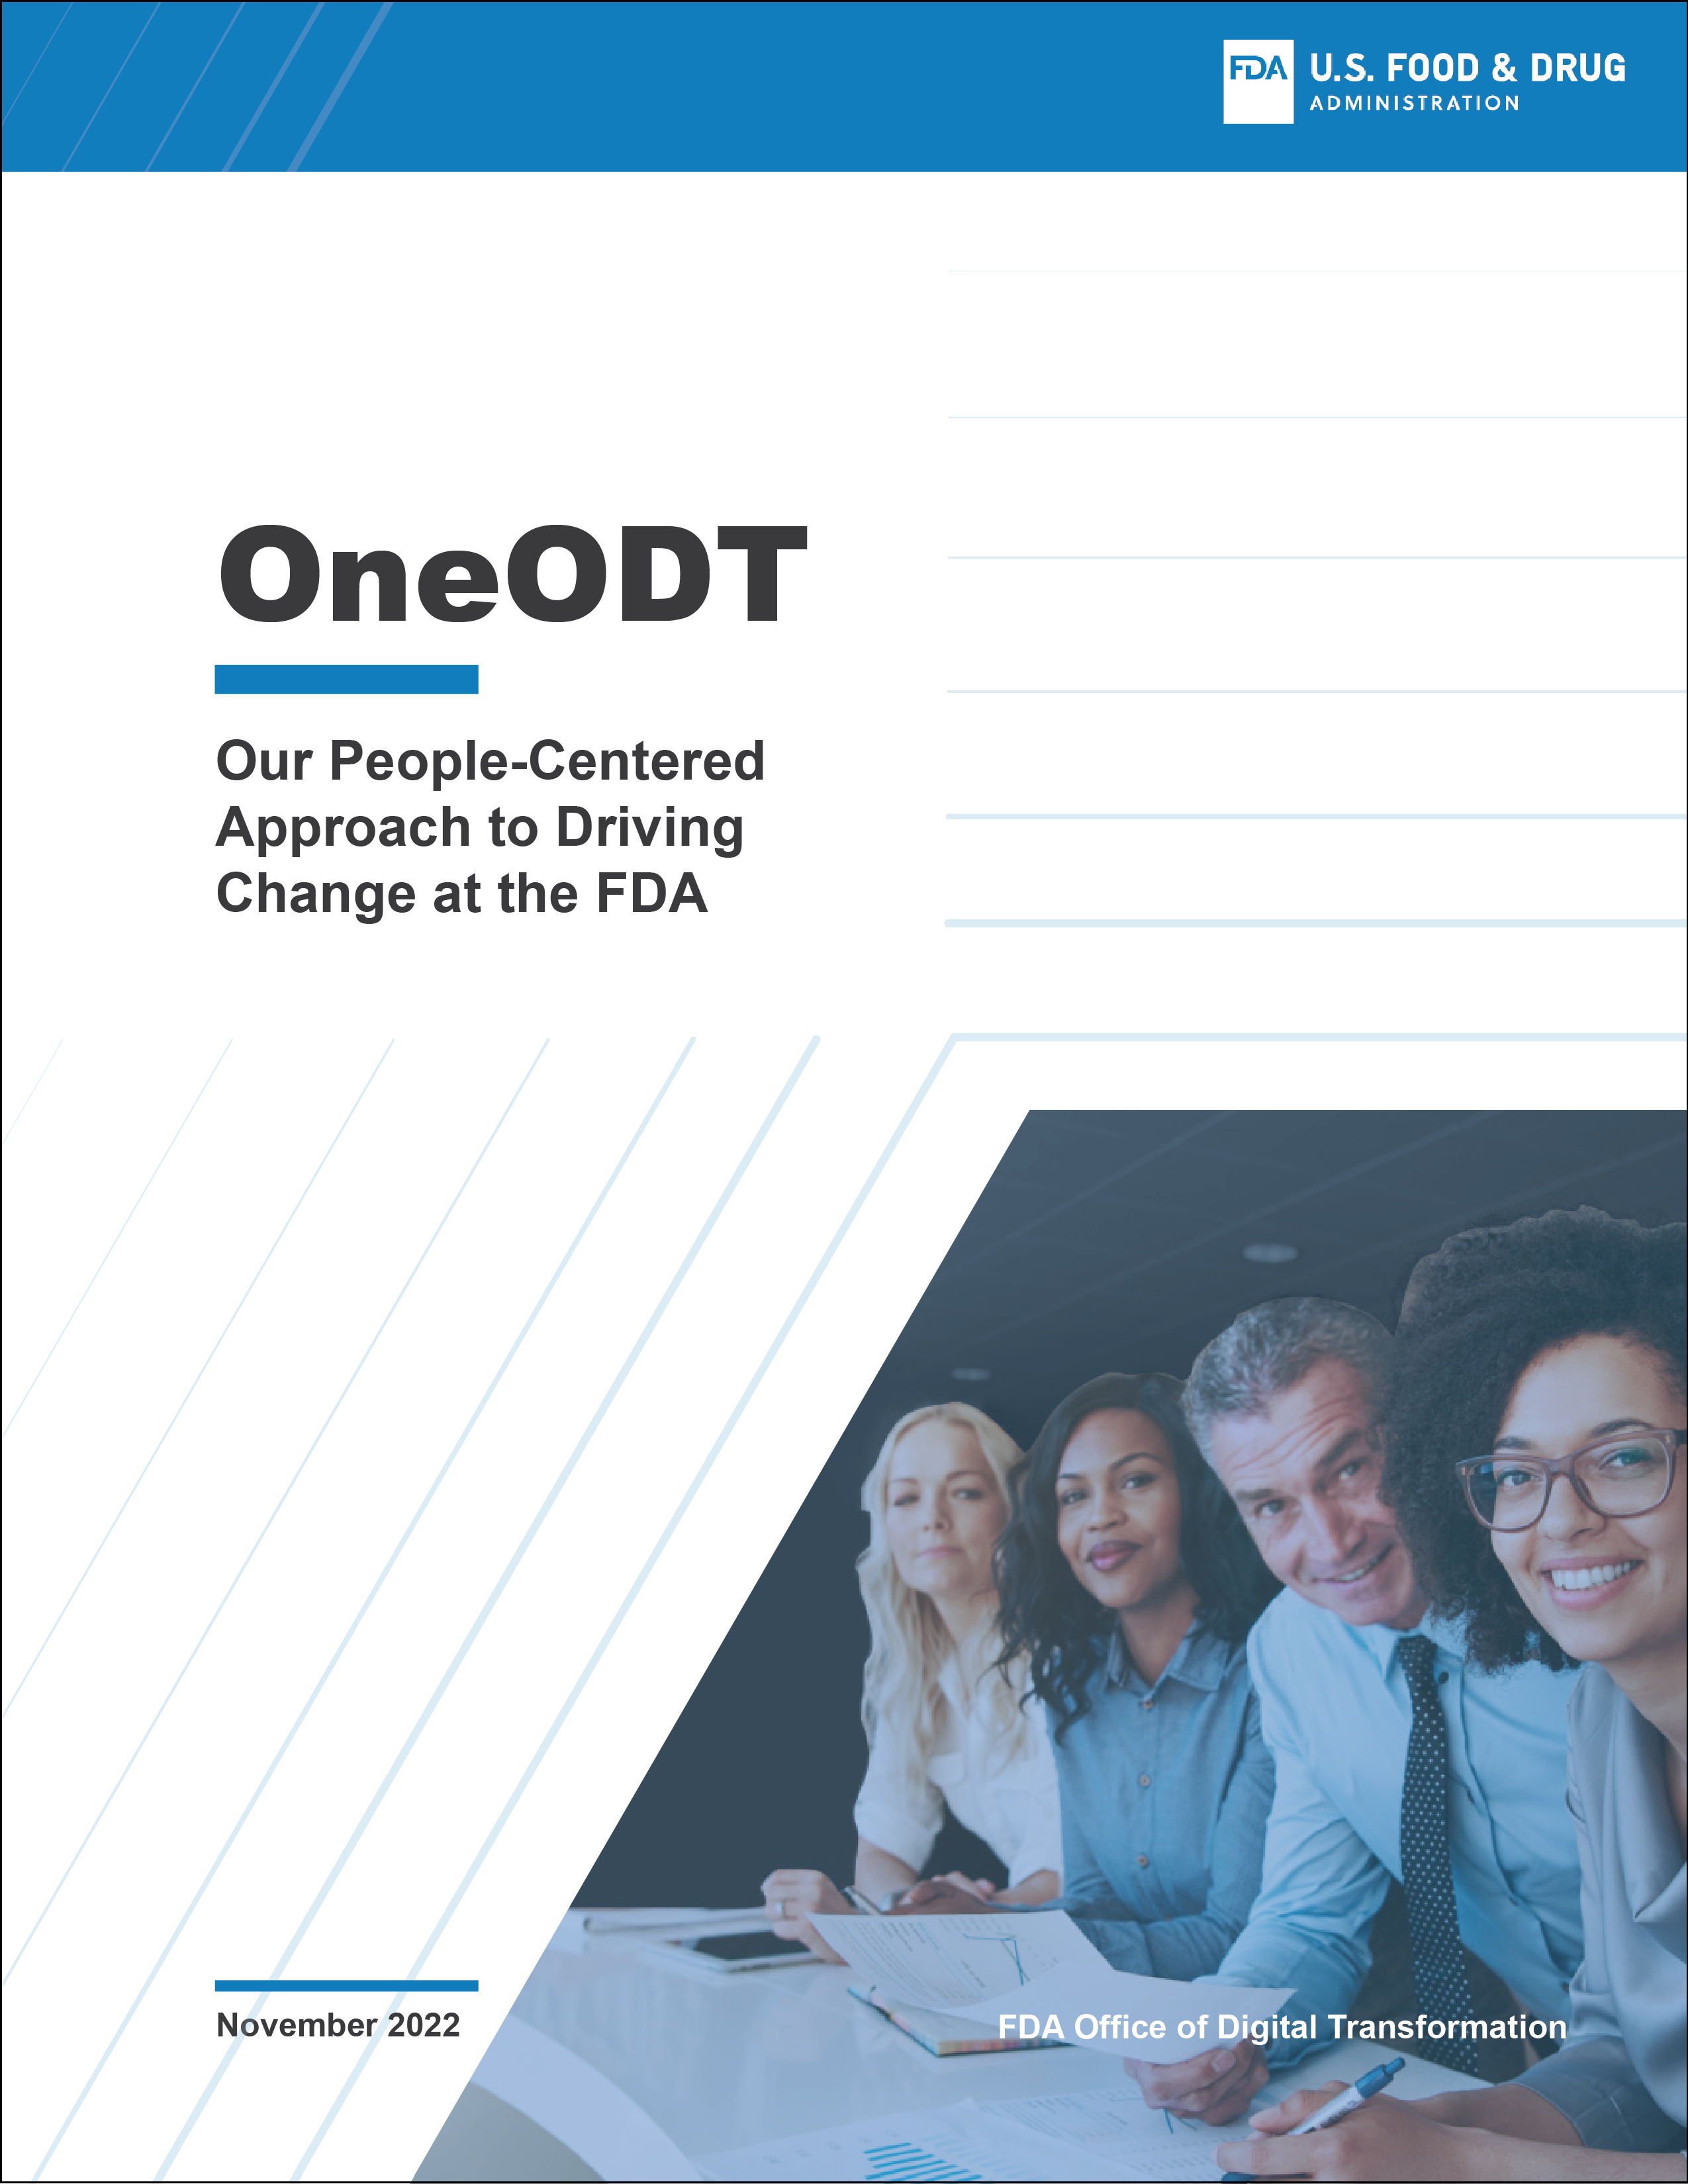 FDA U.S. Food & Drug Administration. OneODT Our People-Centered Approach to Driving Change at the FDA. November 2022.